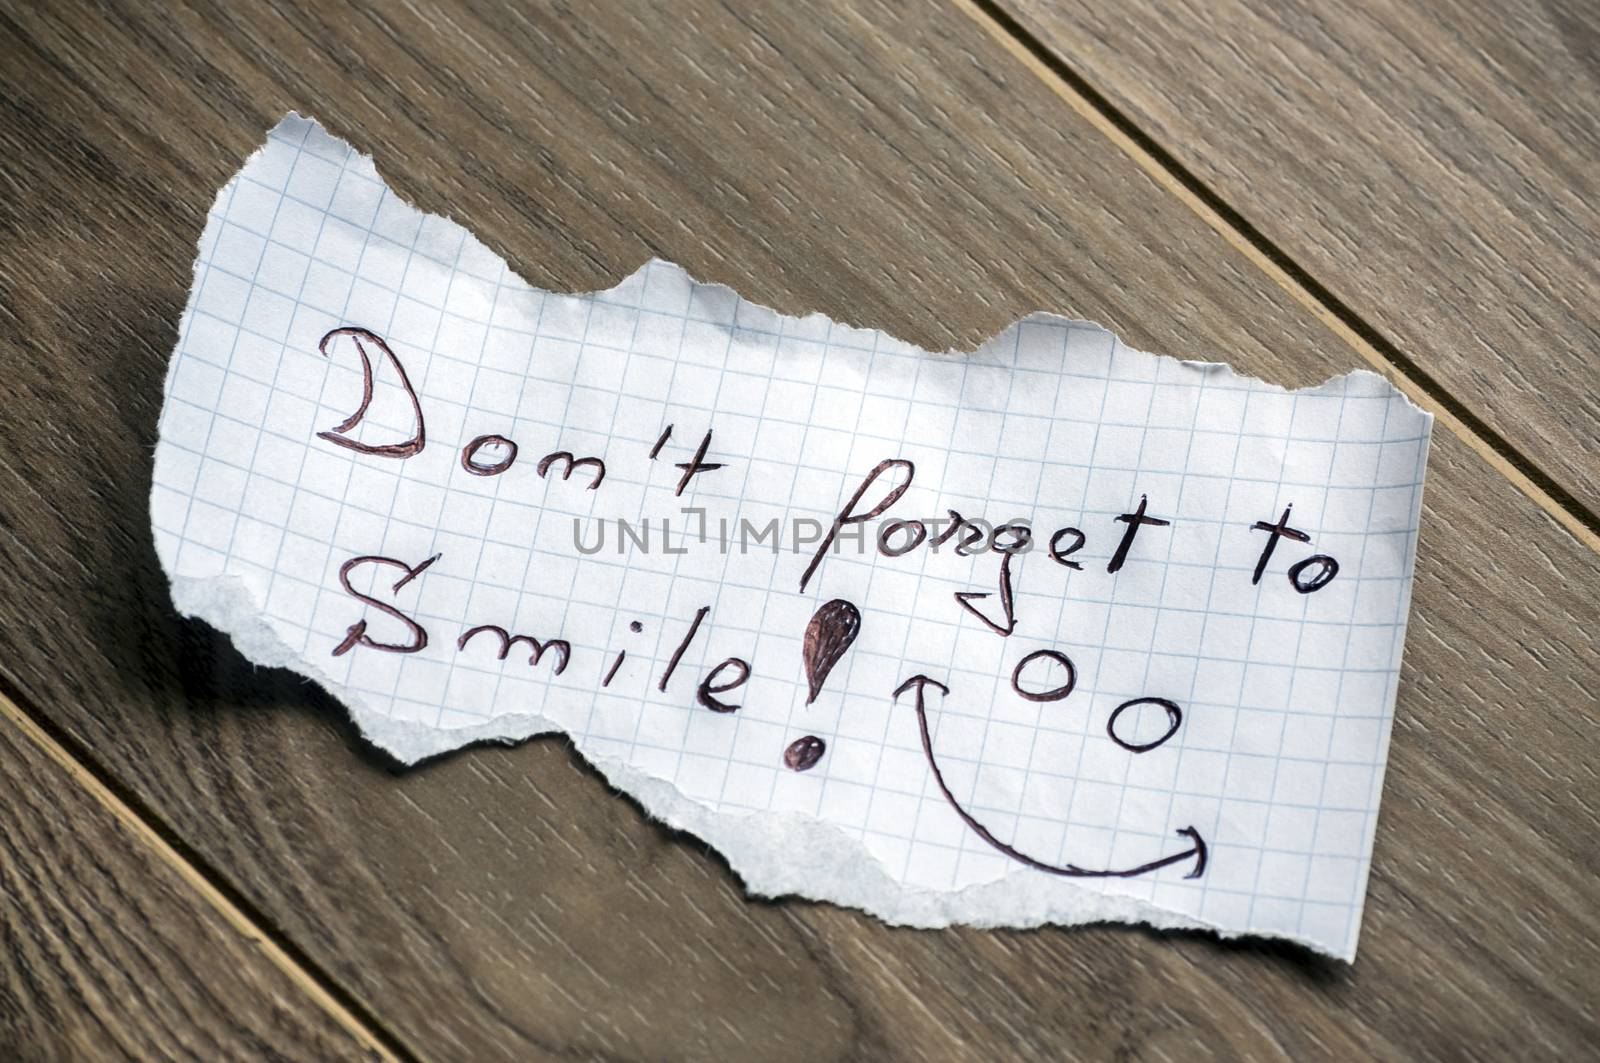 Don't forget to Smile - Hand writing text on a piece of paper on wood background